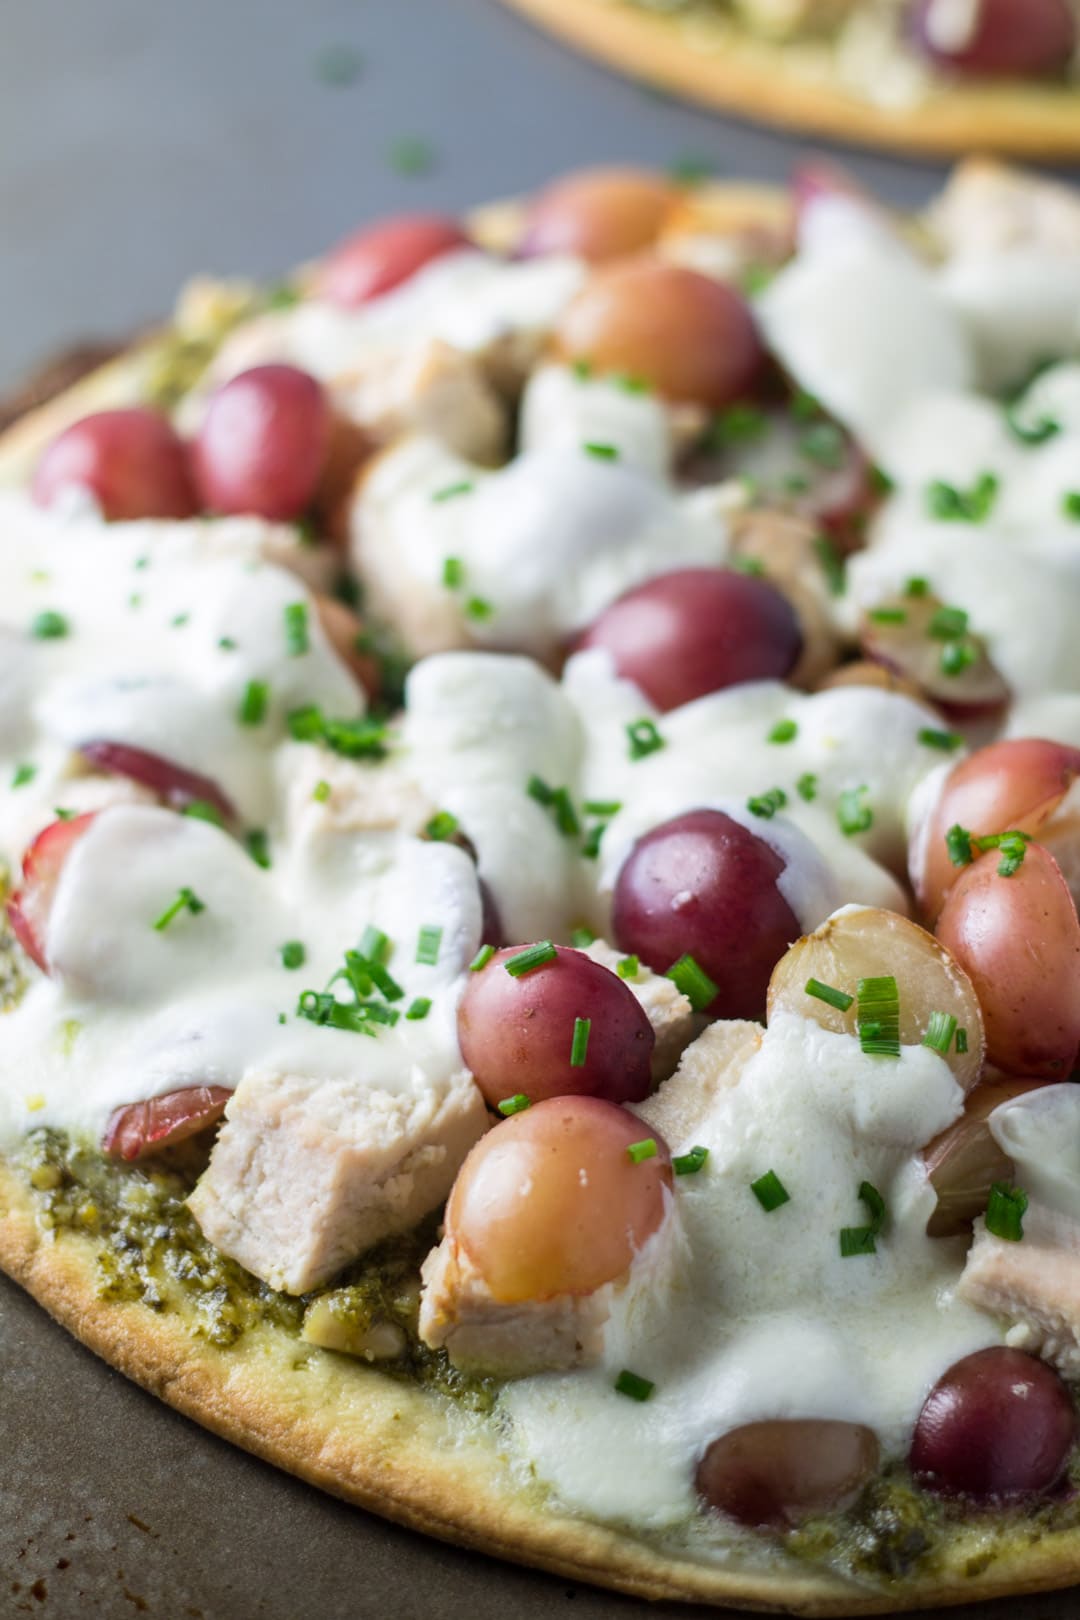 Low FODMAP pizza made with pesto, chicken, red grapes, and mozzarella